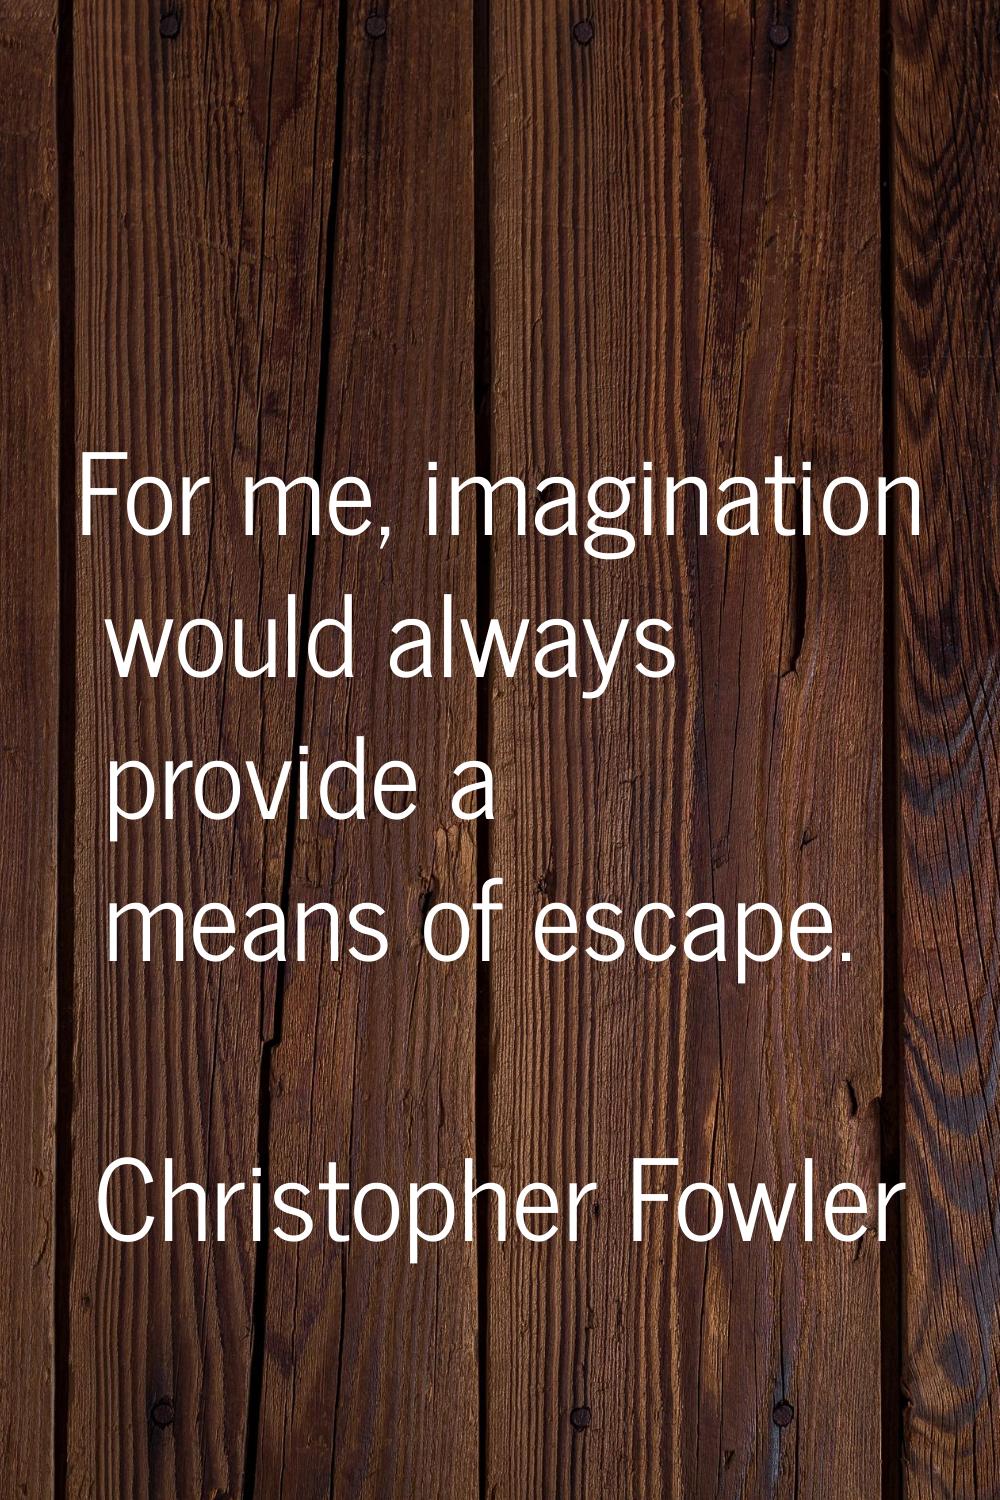 For me, imagination would always provide a means of escape.